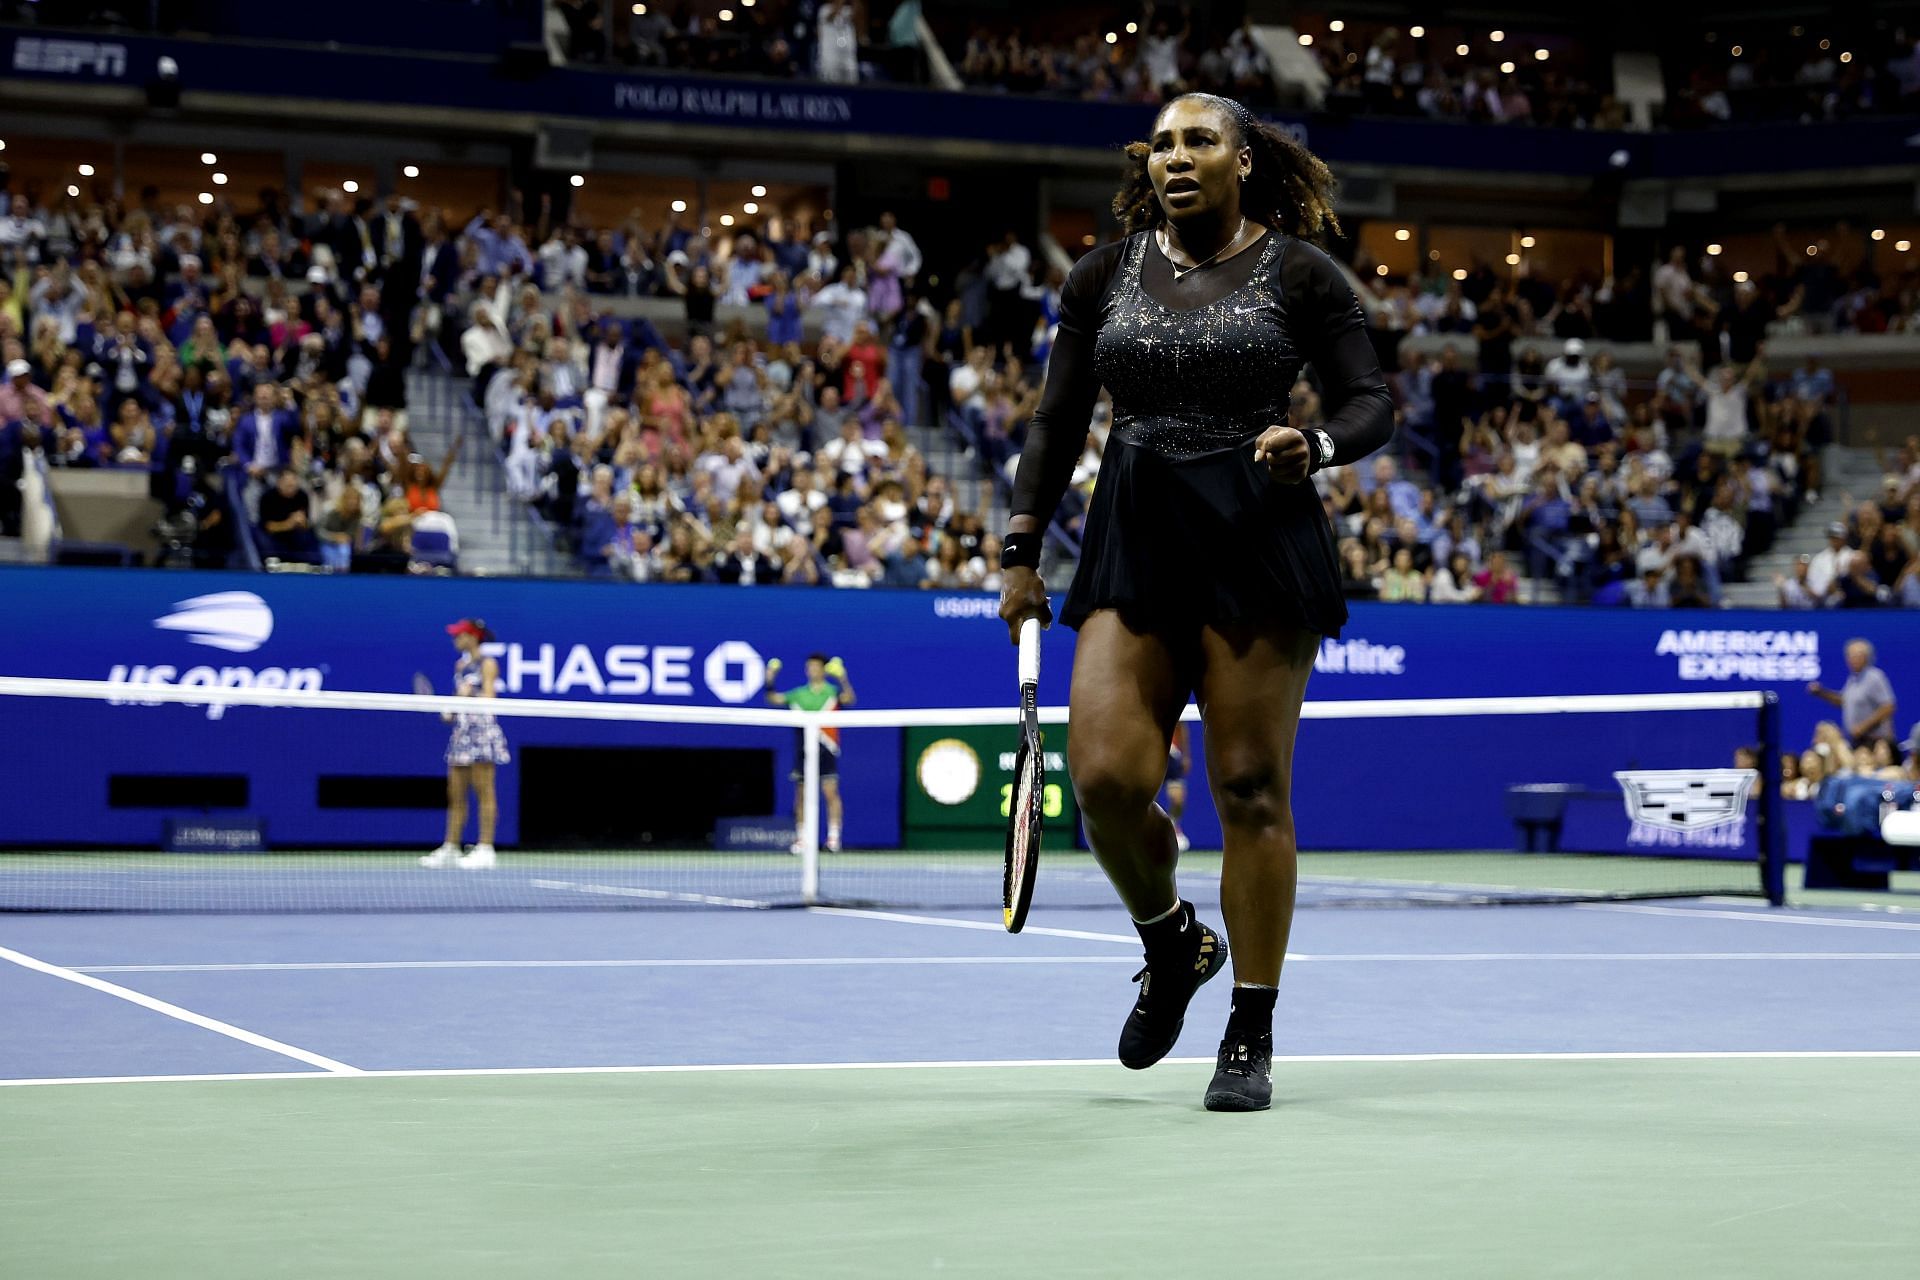 Serena during her final match at the 2022 US Open